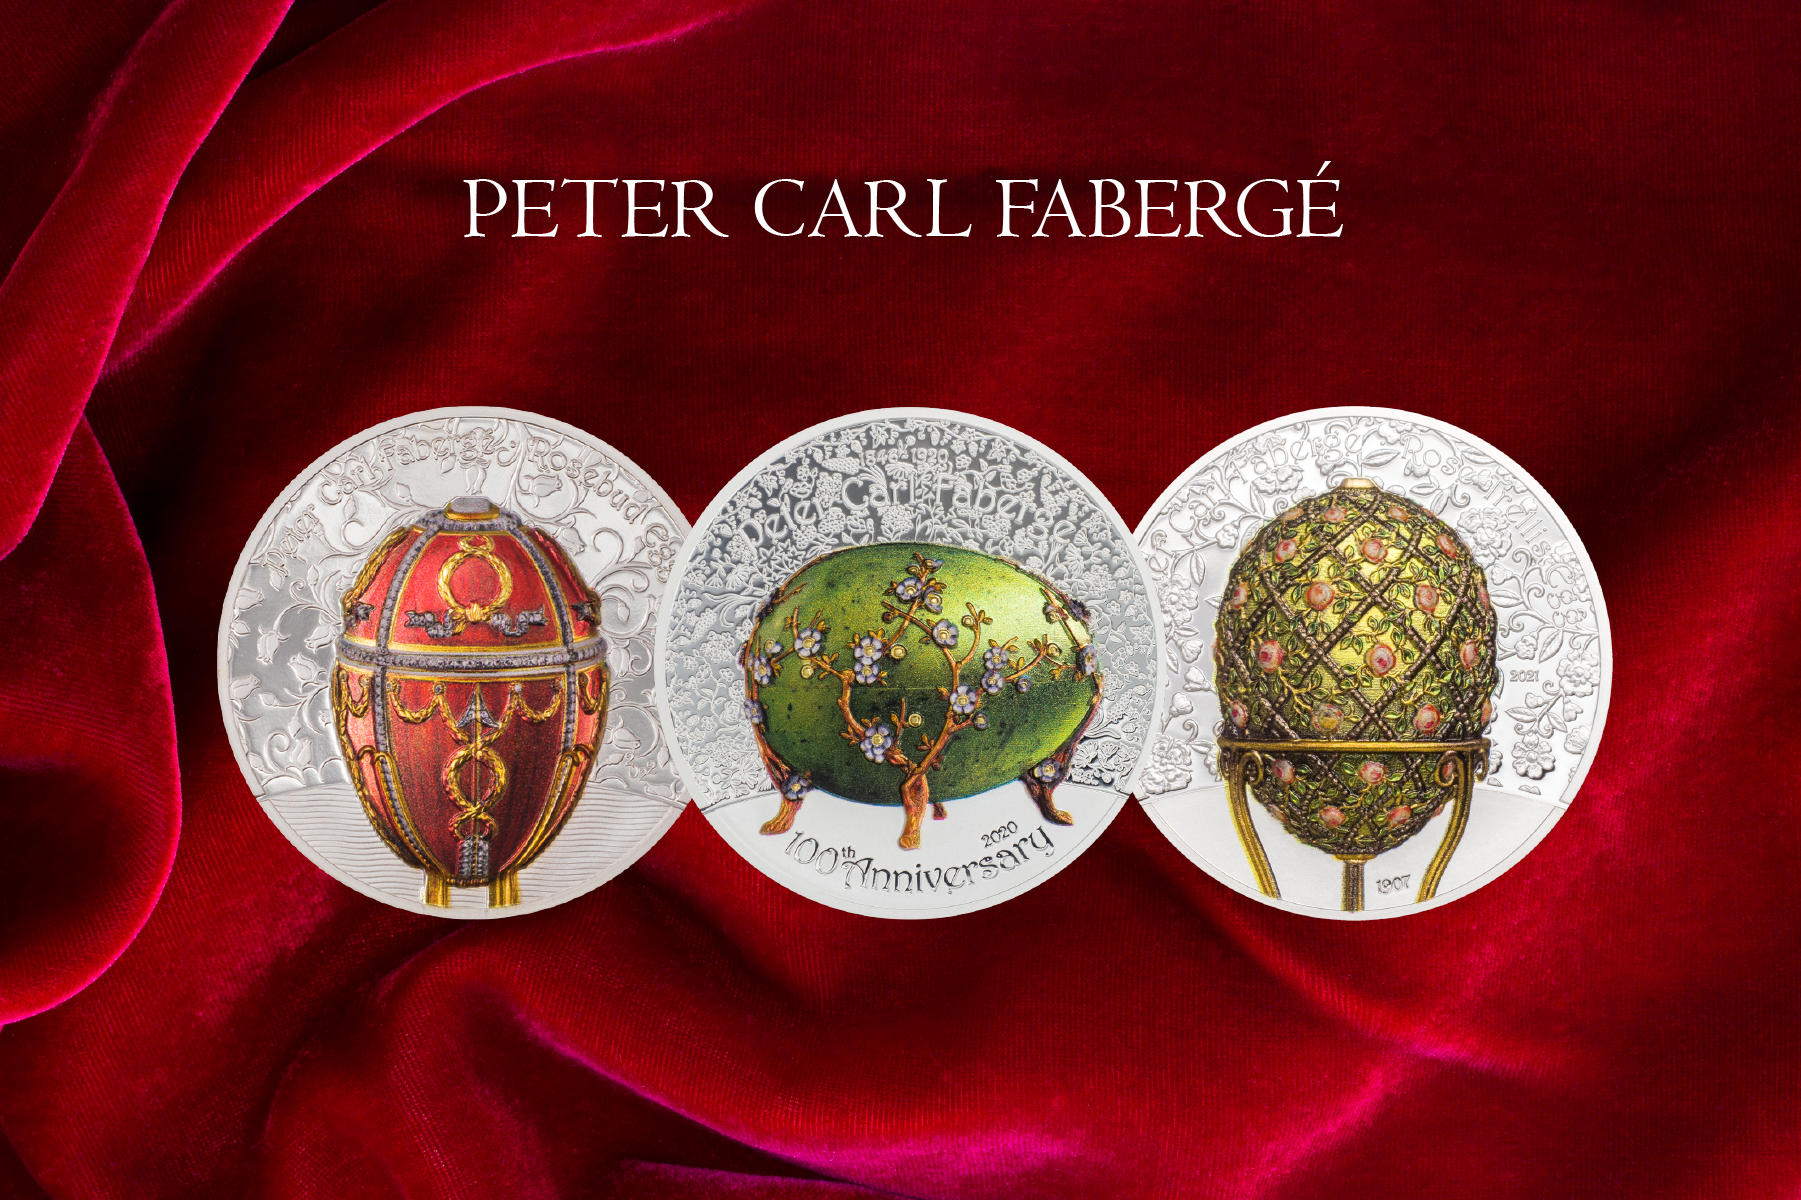 Peter Carl Faberge Egg 2 oz Silver Coins